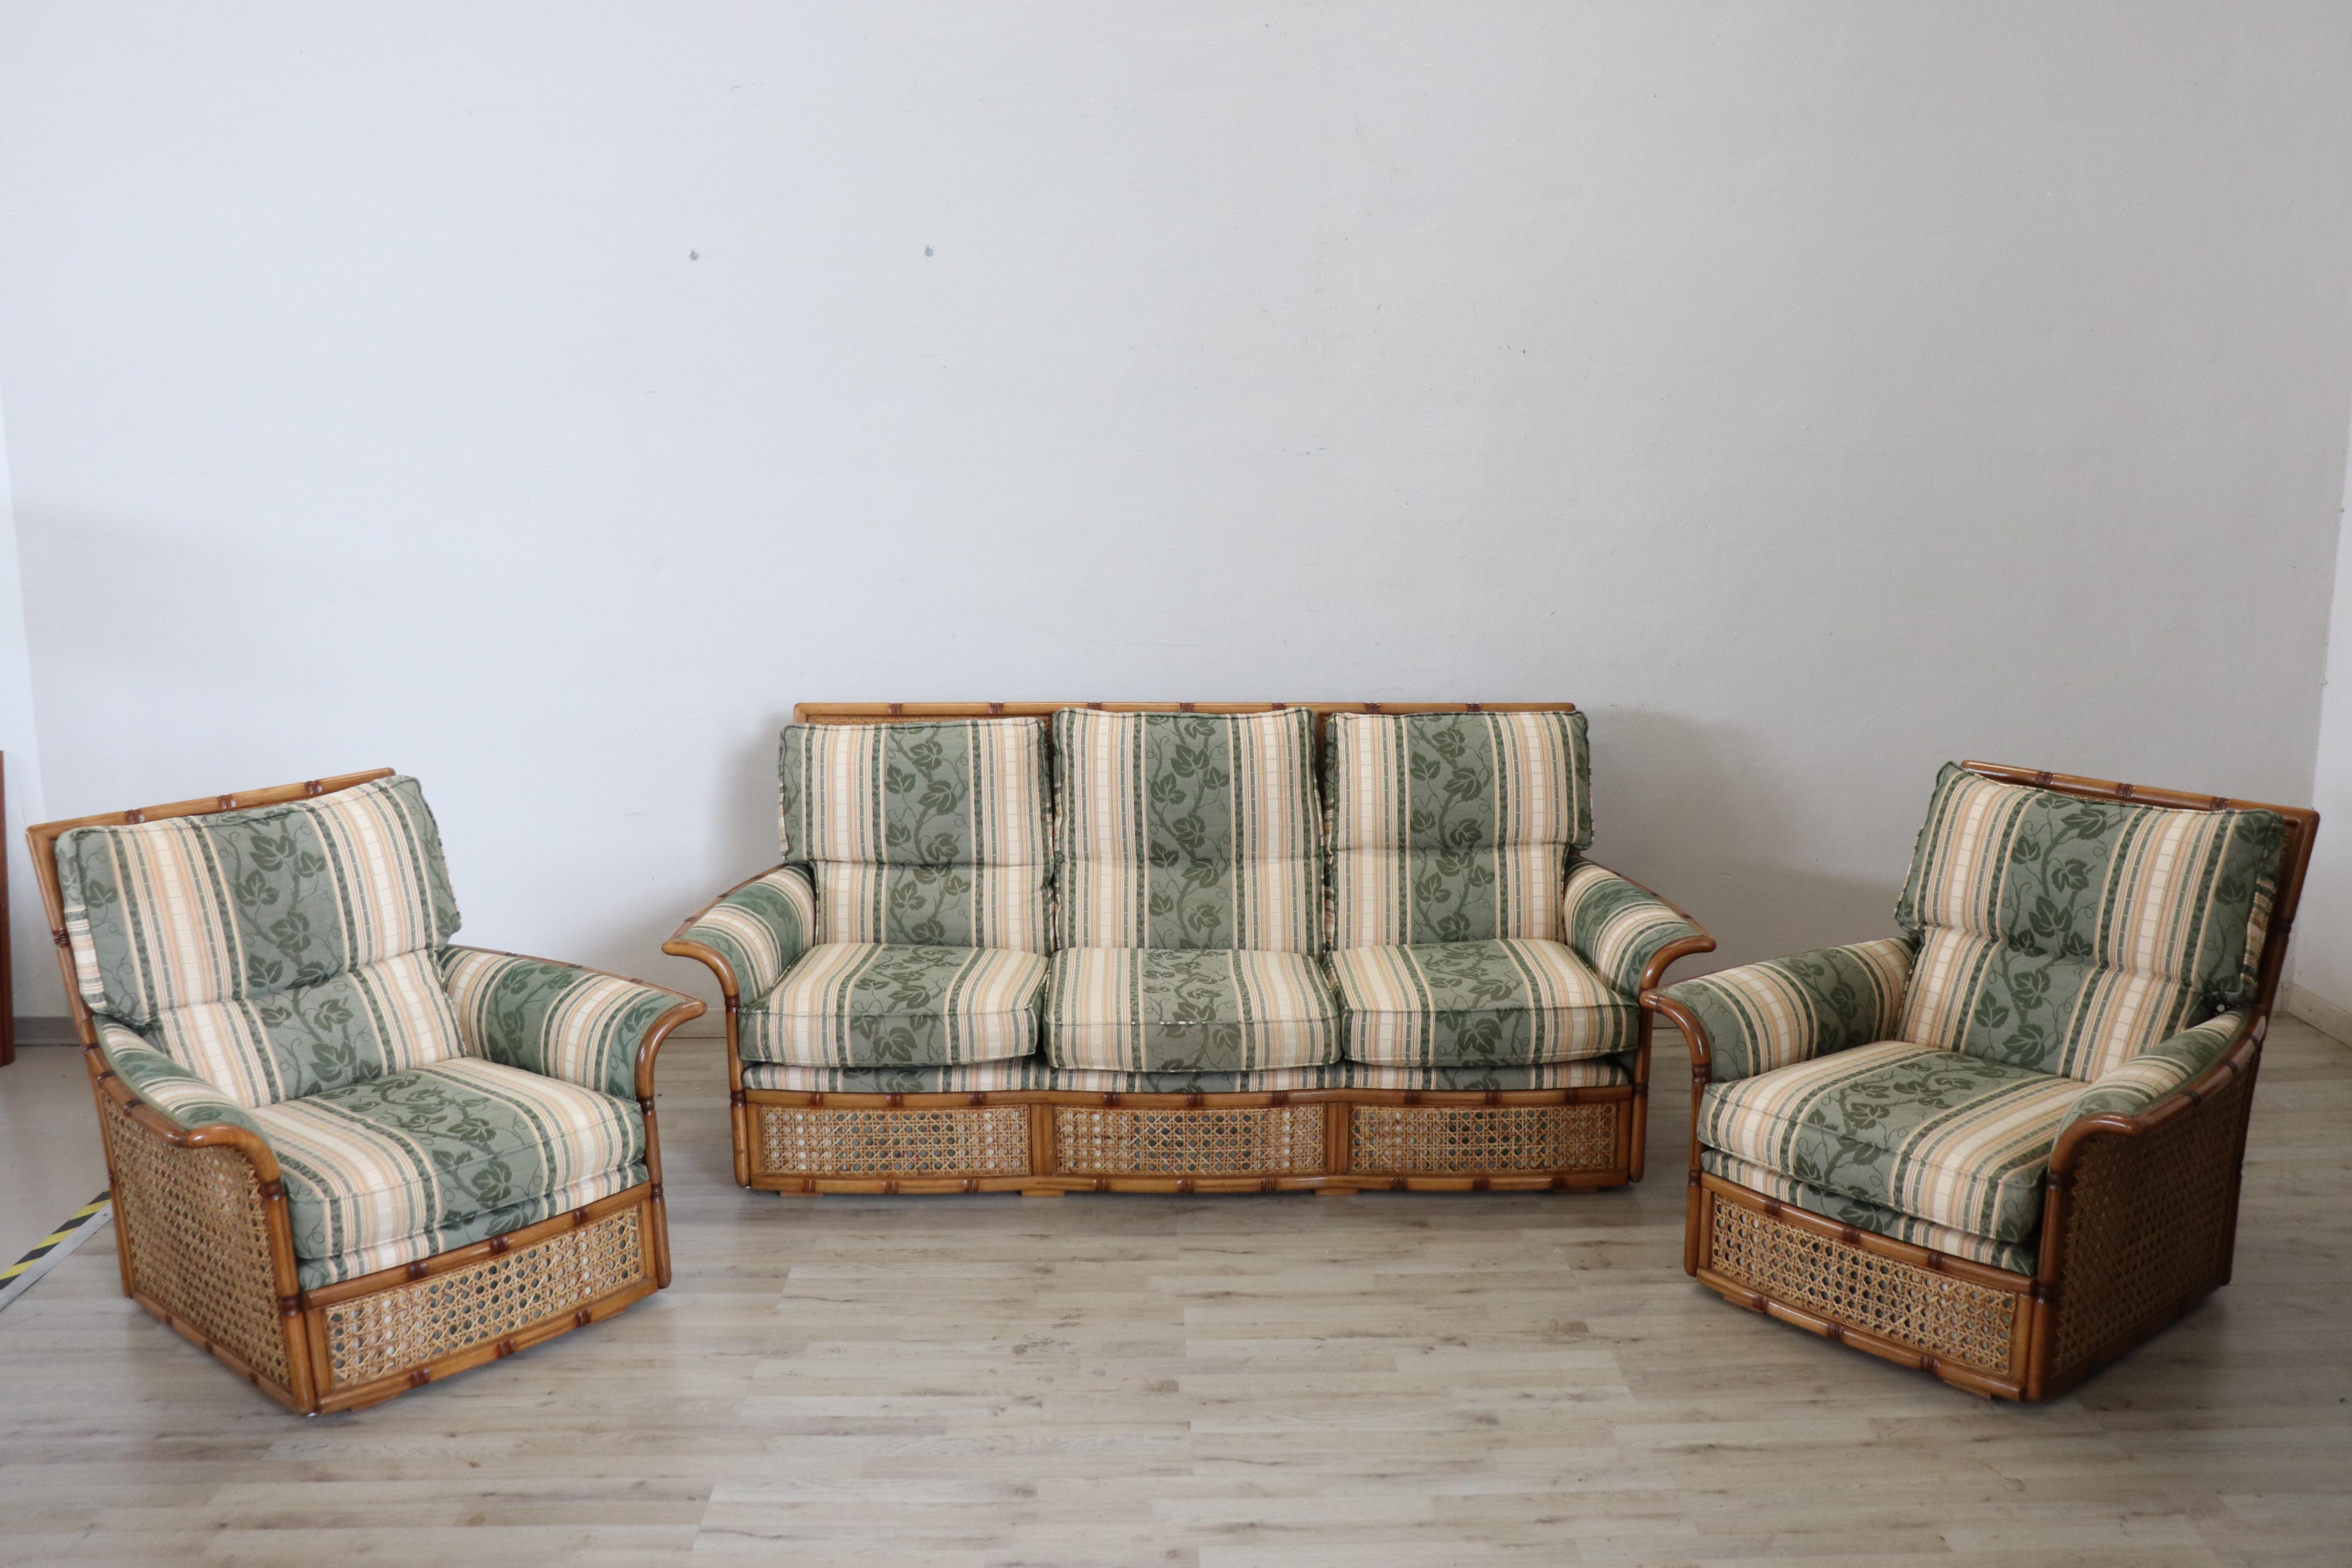 Rare complete early 20th century Italian living room set includes:
1 sofa
2 armchairs
1 sofa table
Refined living room made of beech wood. particular woodwork that looks like bamboo. Fully decorated in elegant Viennese straw. Large and